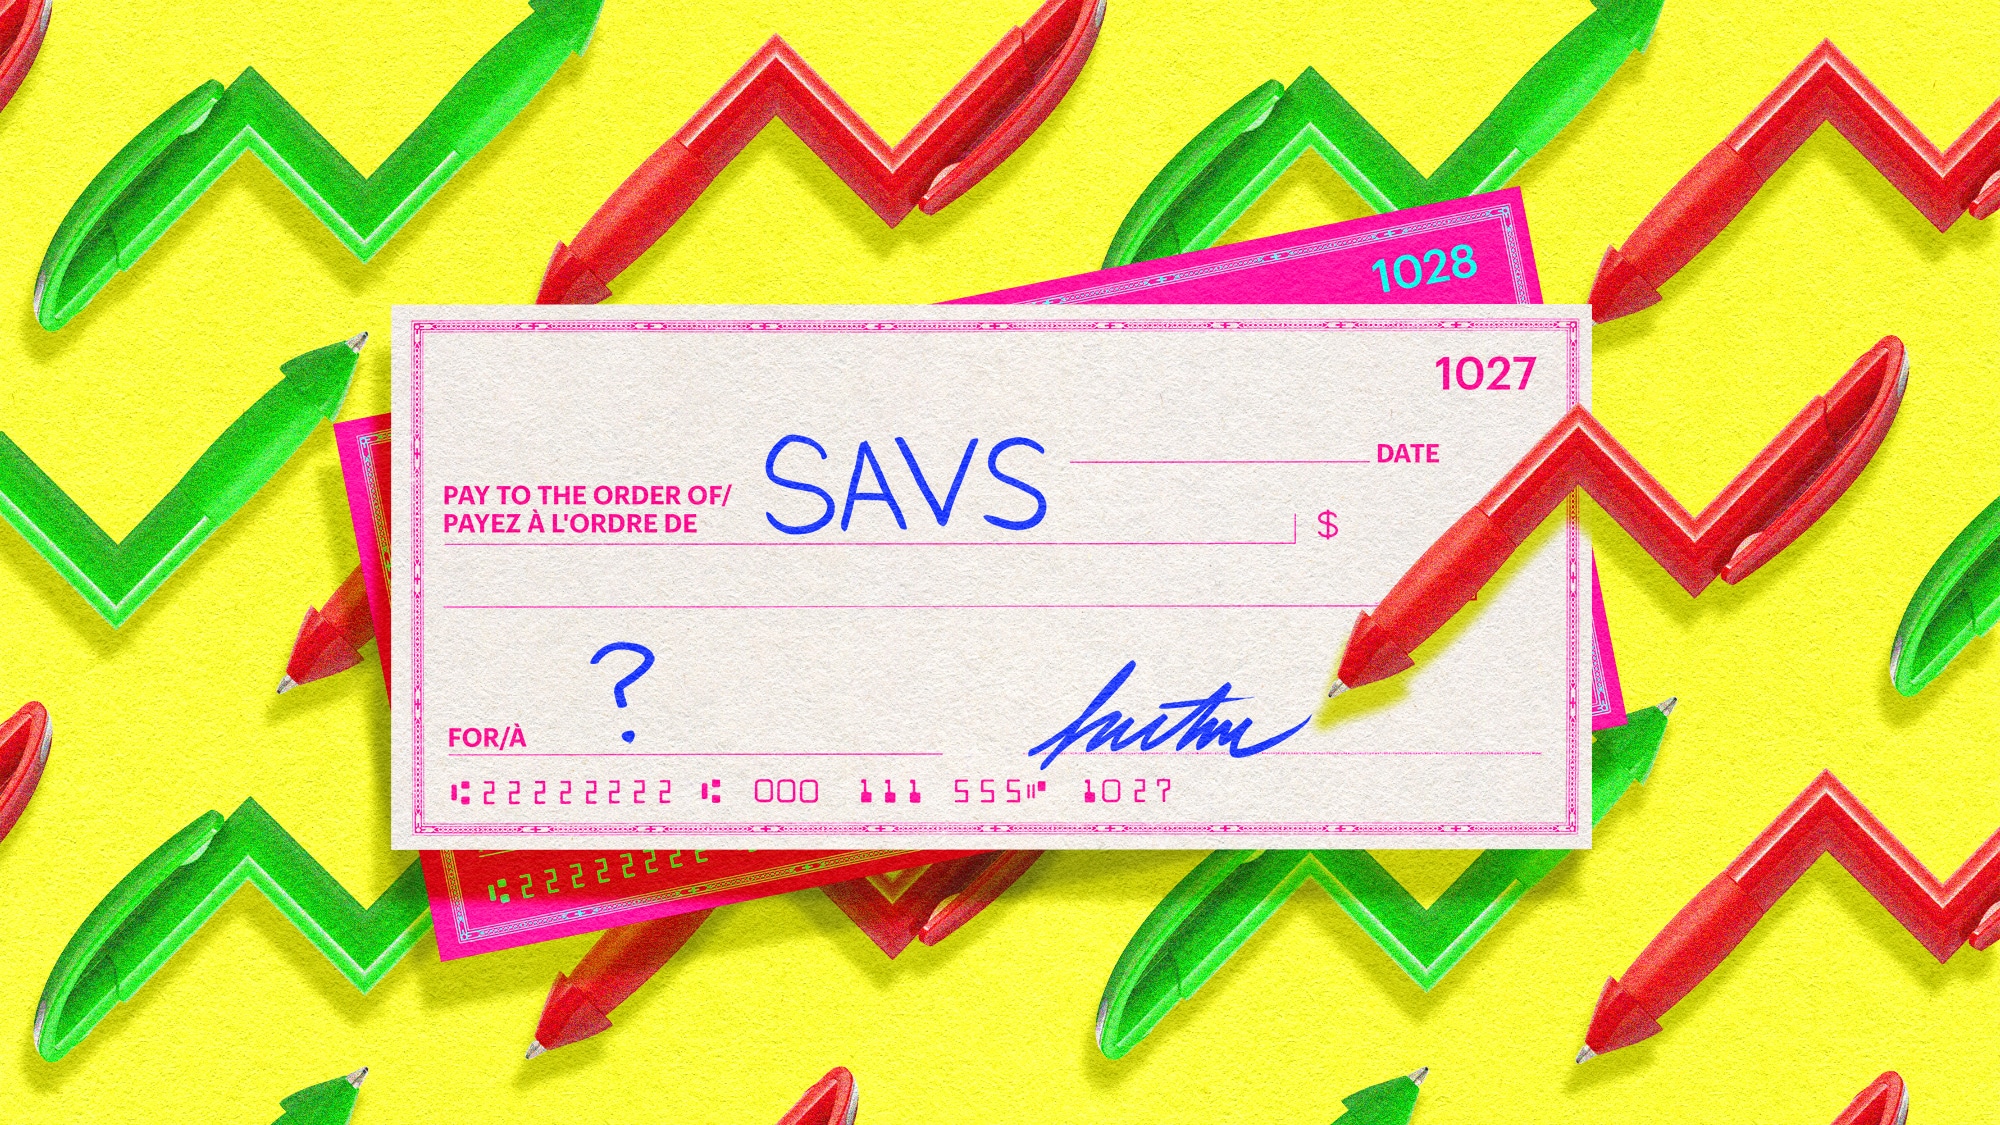 A cheque that says "SAVS" on a yellow background, surrounded by pens that look like stock market chart arrows.